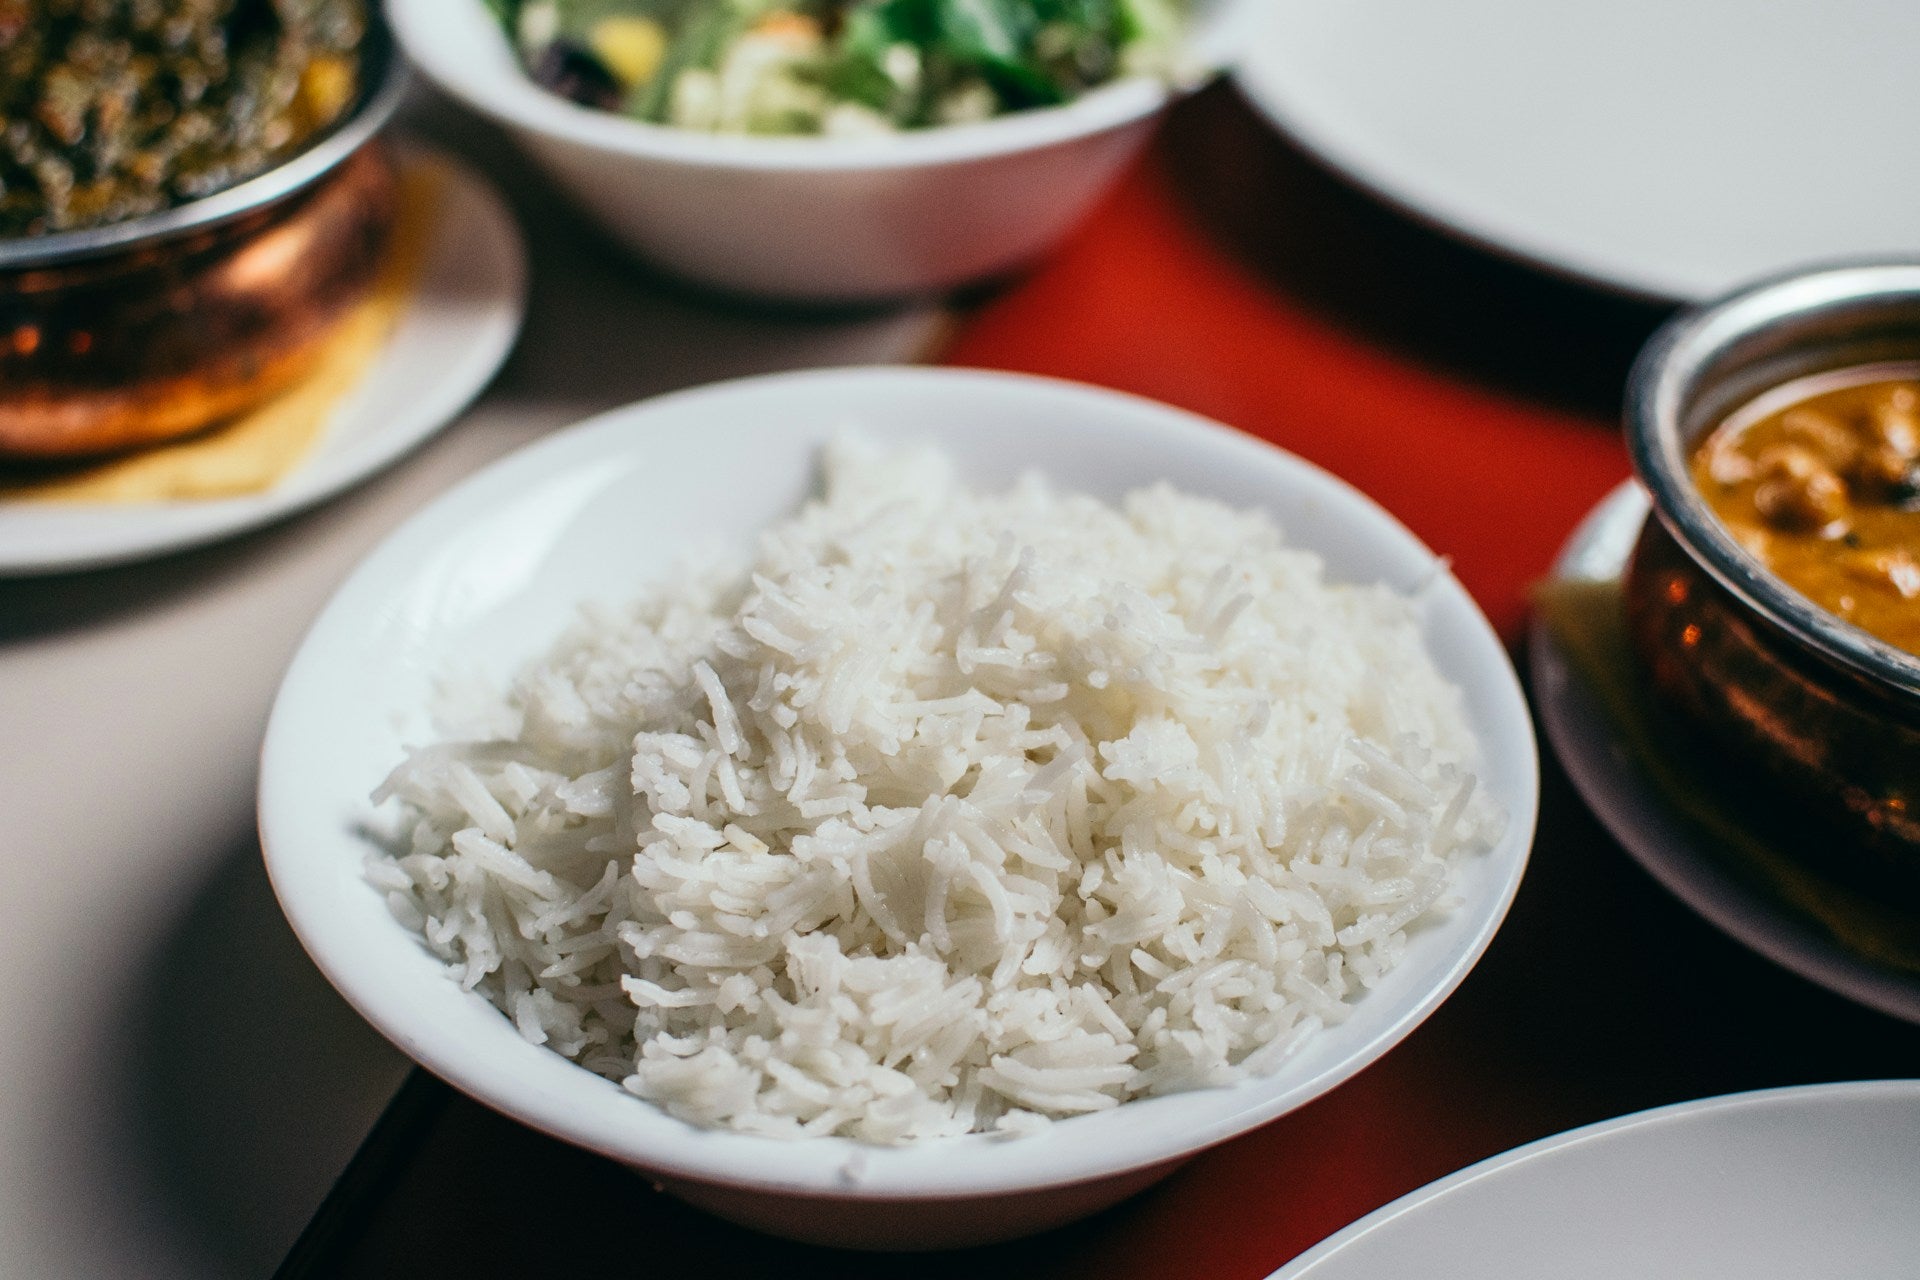 Buy Cheap Bulk Rice for Restaurants: Top Wholesale Rice Options in the US